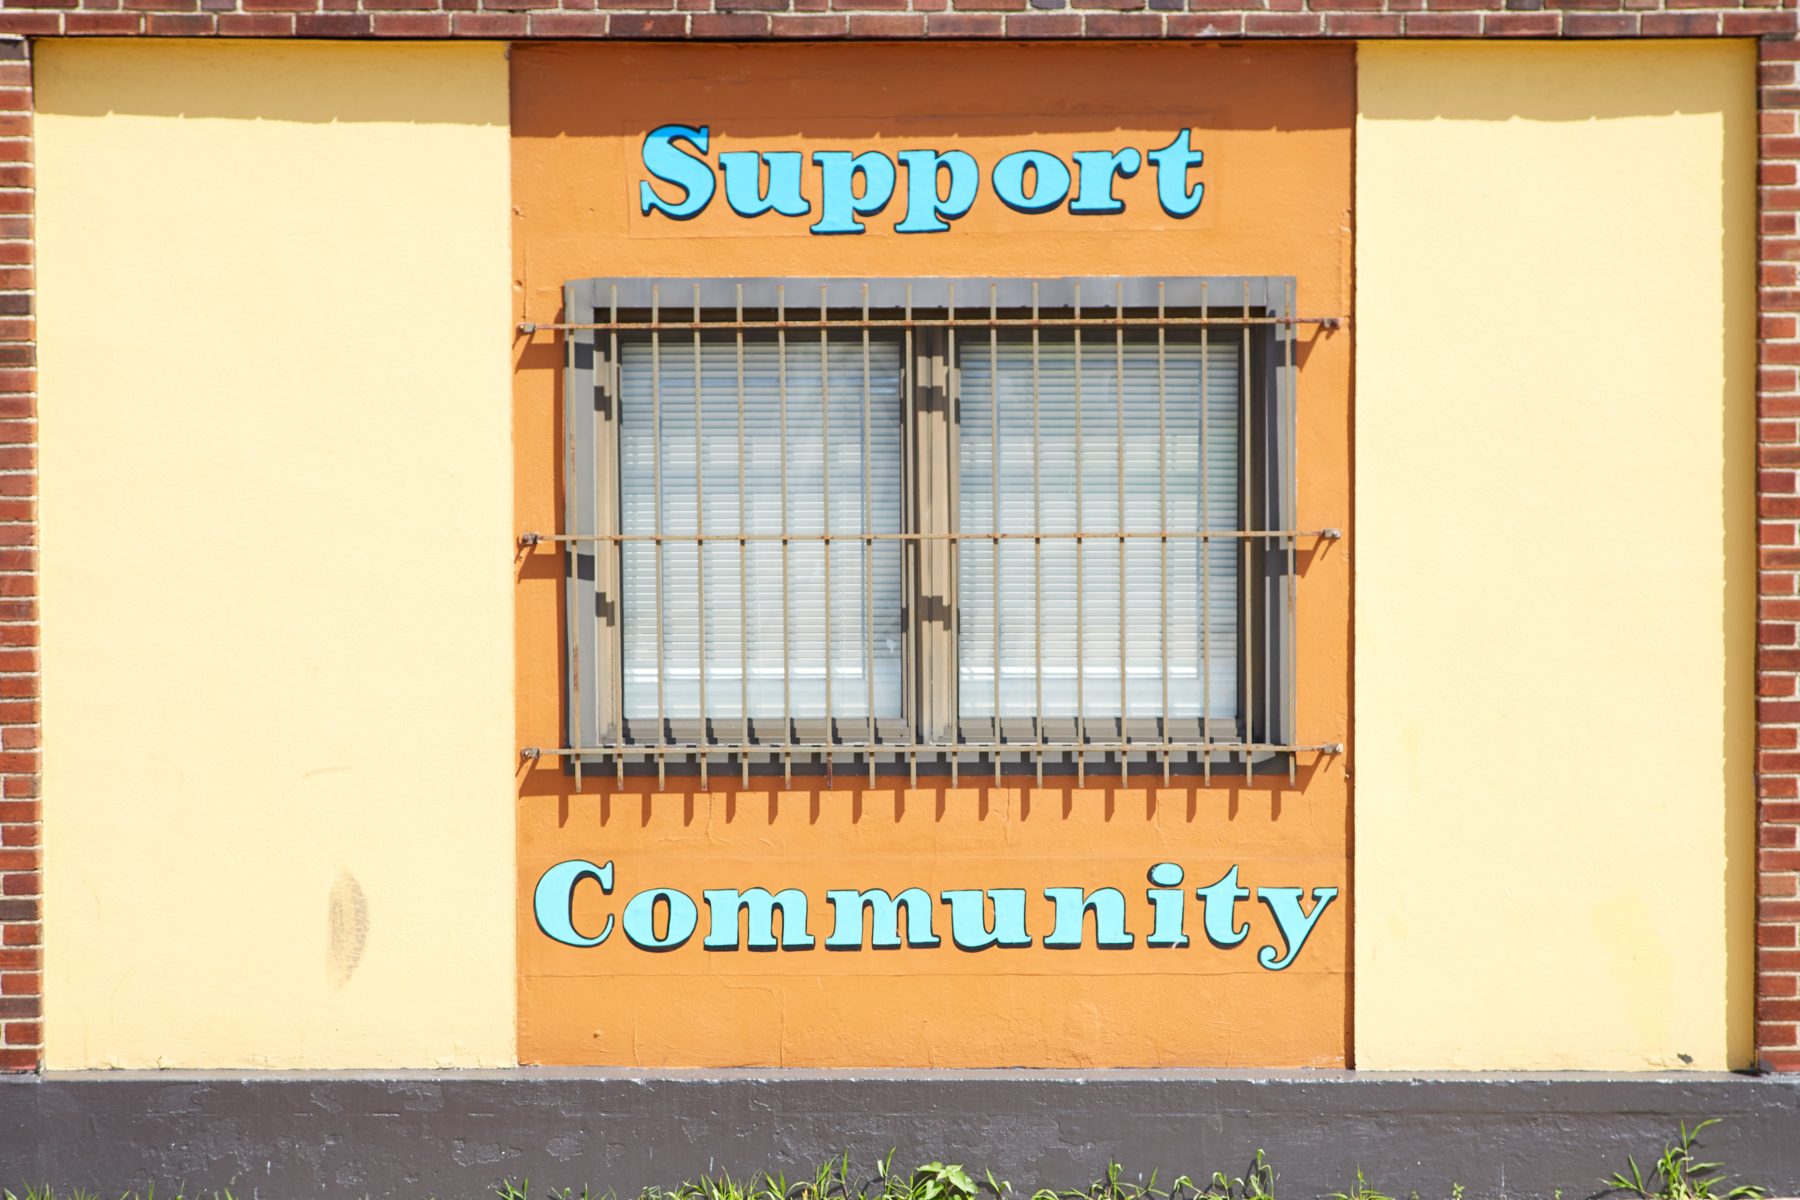 A light yellow and orange wall with a window has the words "support community" painted on it in blue.